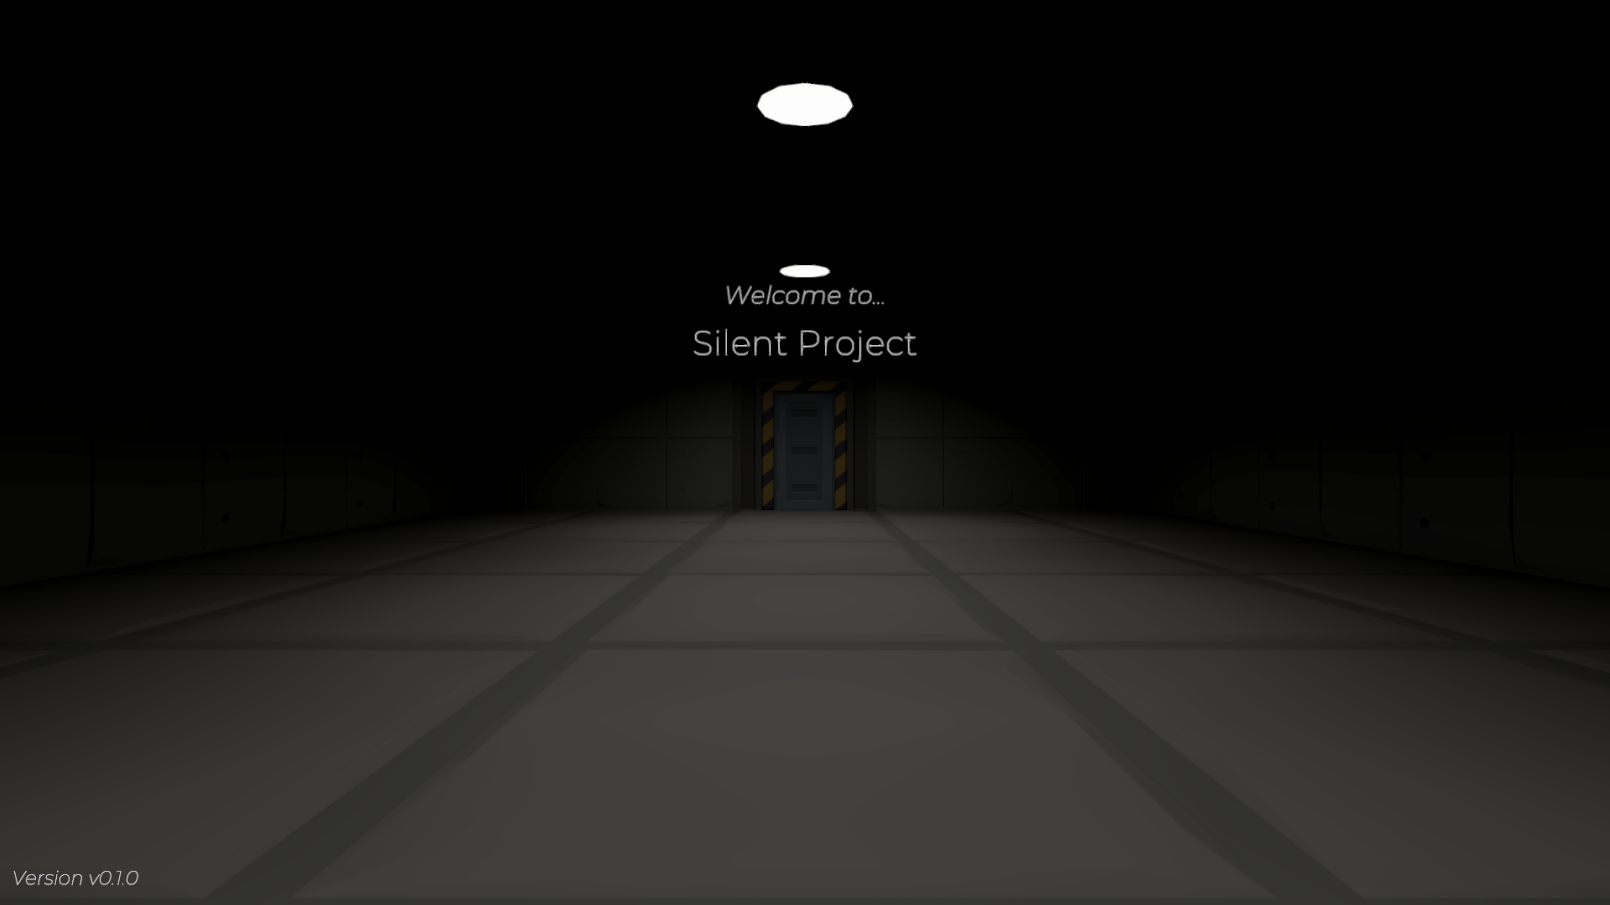 Silent Project